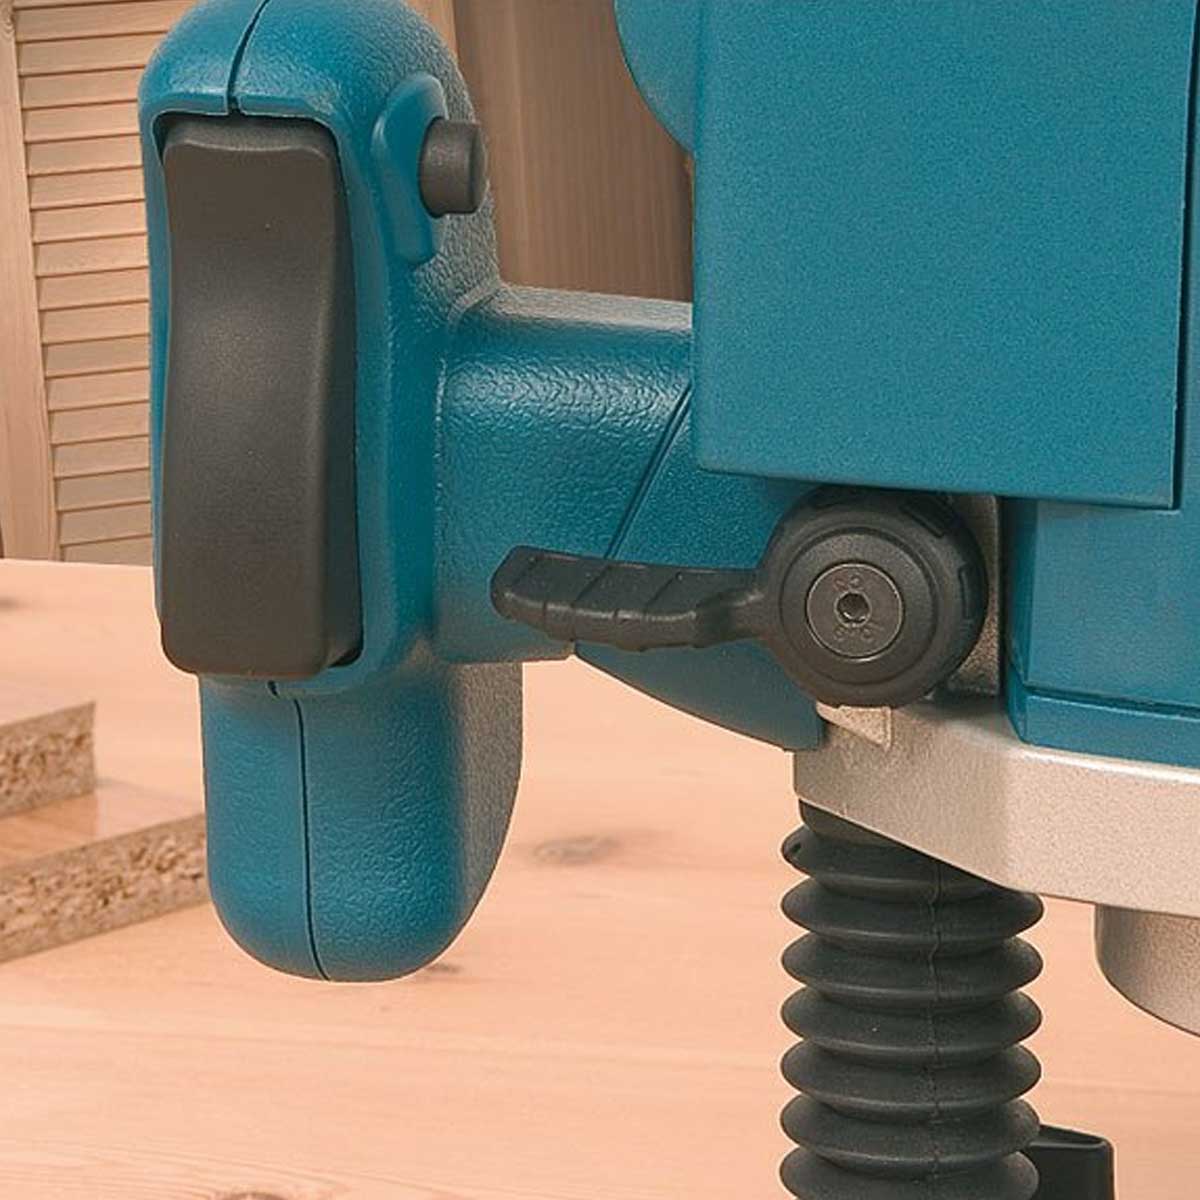 European Hand Router Manufacturers, Suppliers in Hyderabad